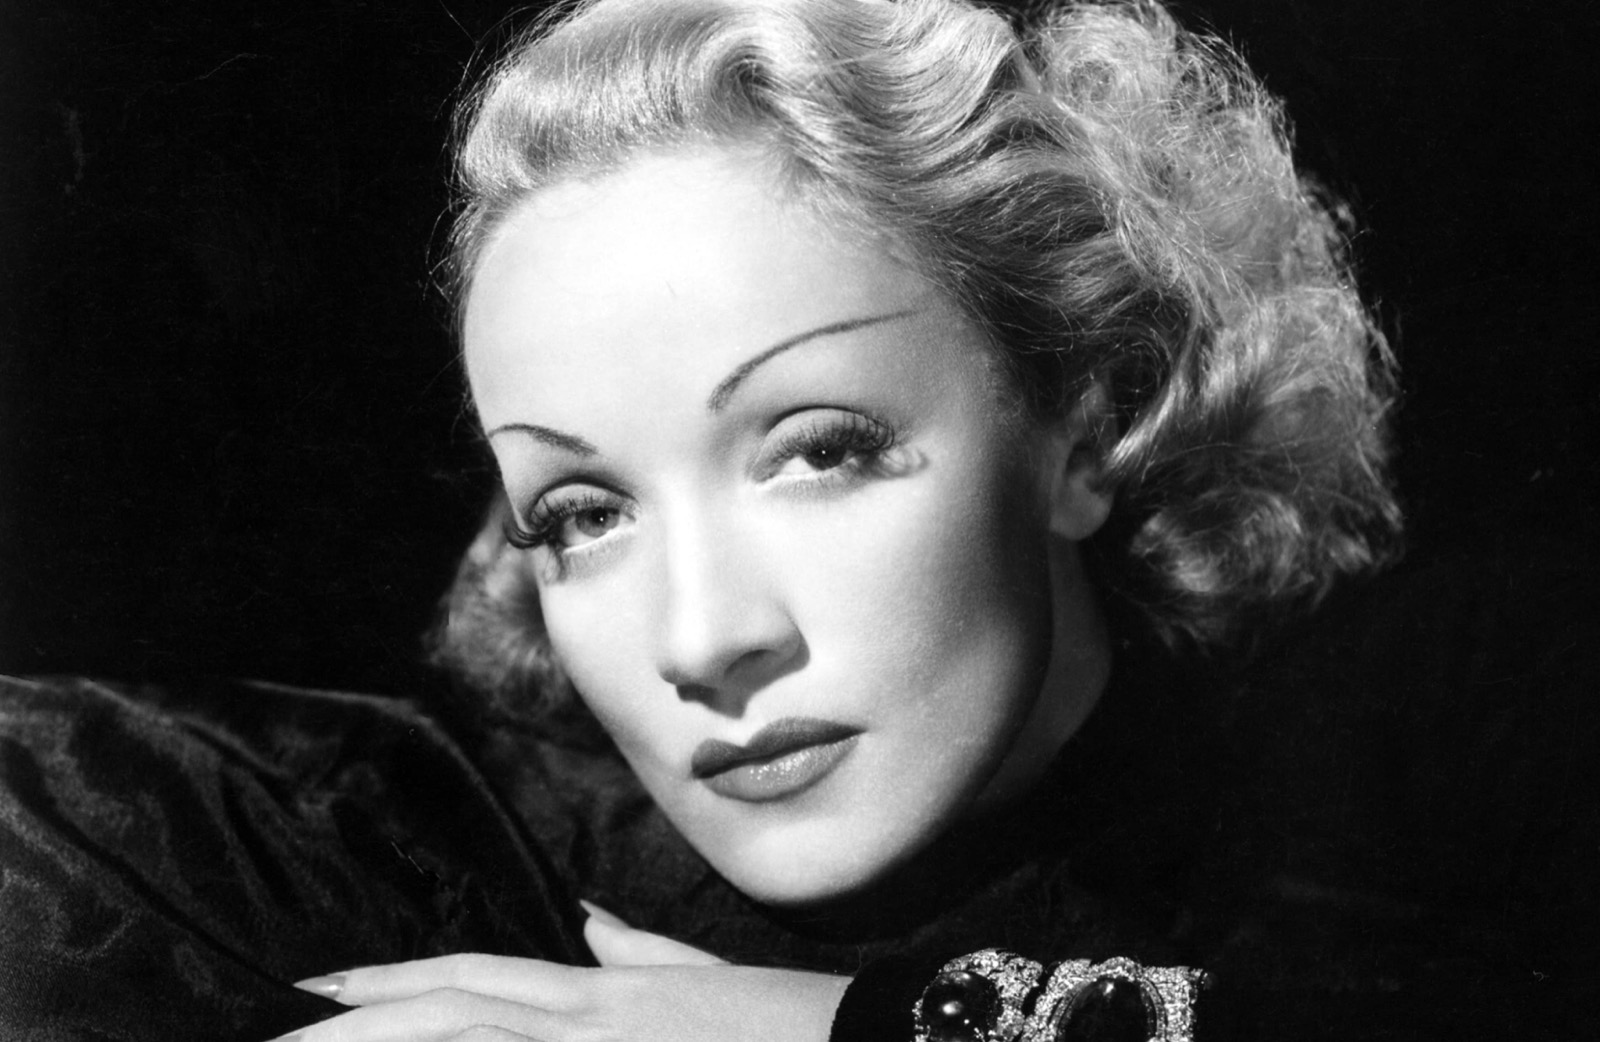 It’s Time to Find Out What Fantasy World You Belong in With the Celebs You Prefer Marlene Dietrich